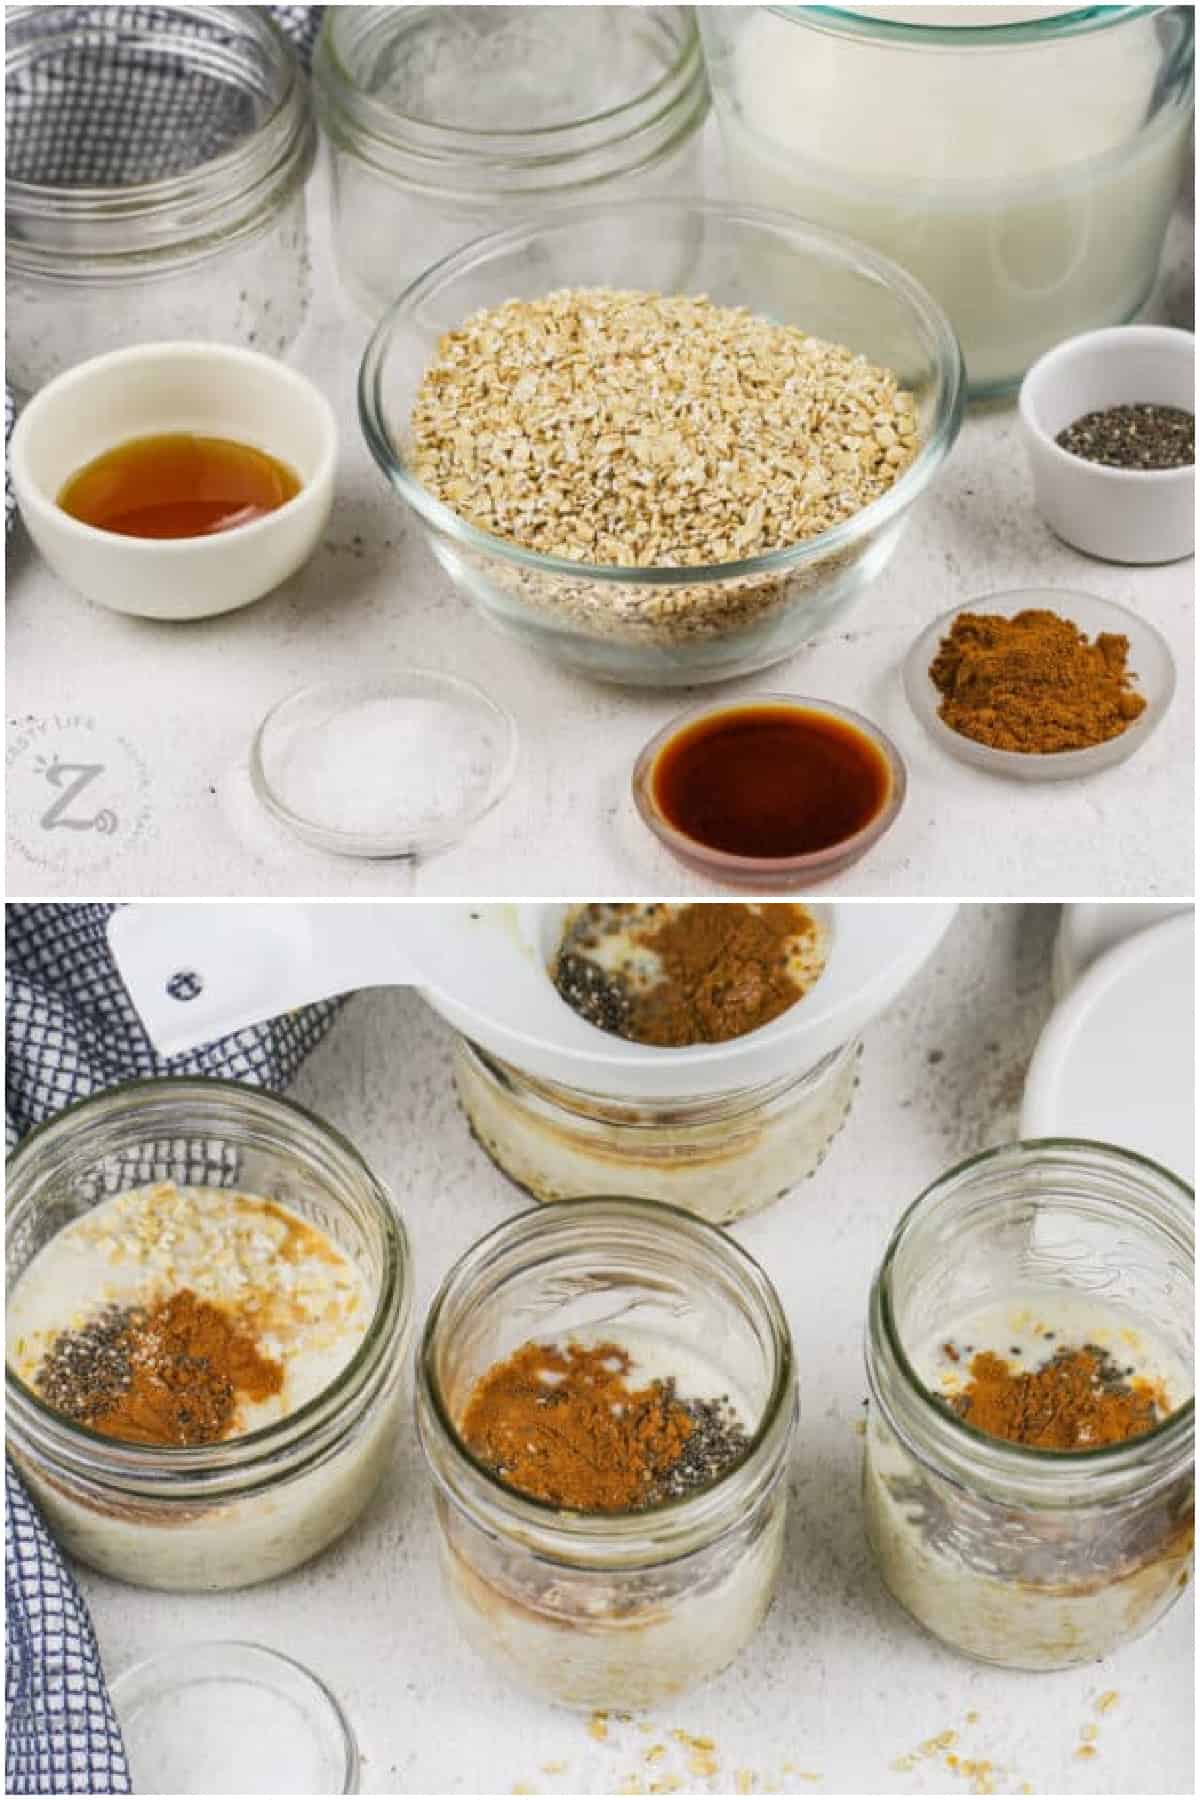 ingredients to make overnight steel cut oats, and process to add ingredients to jars